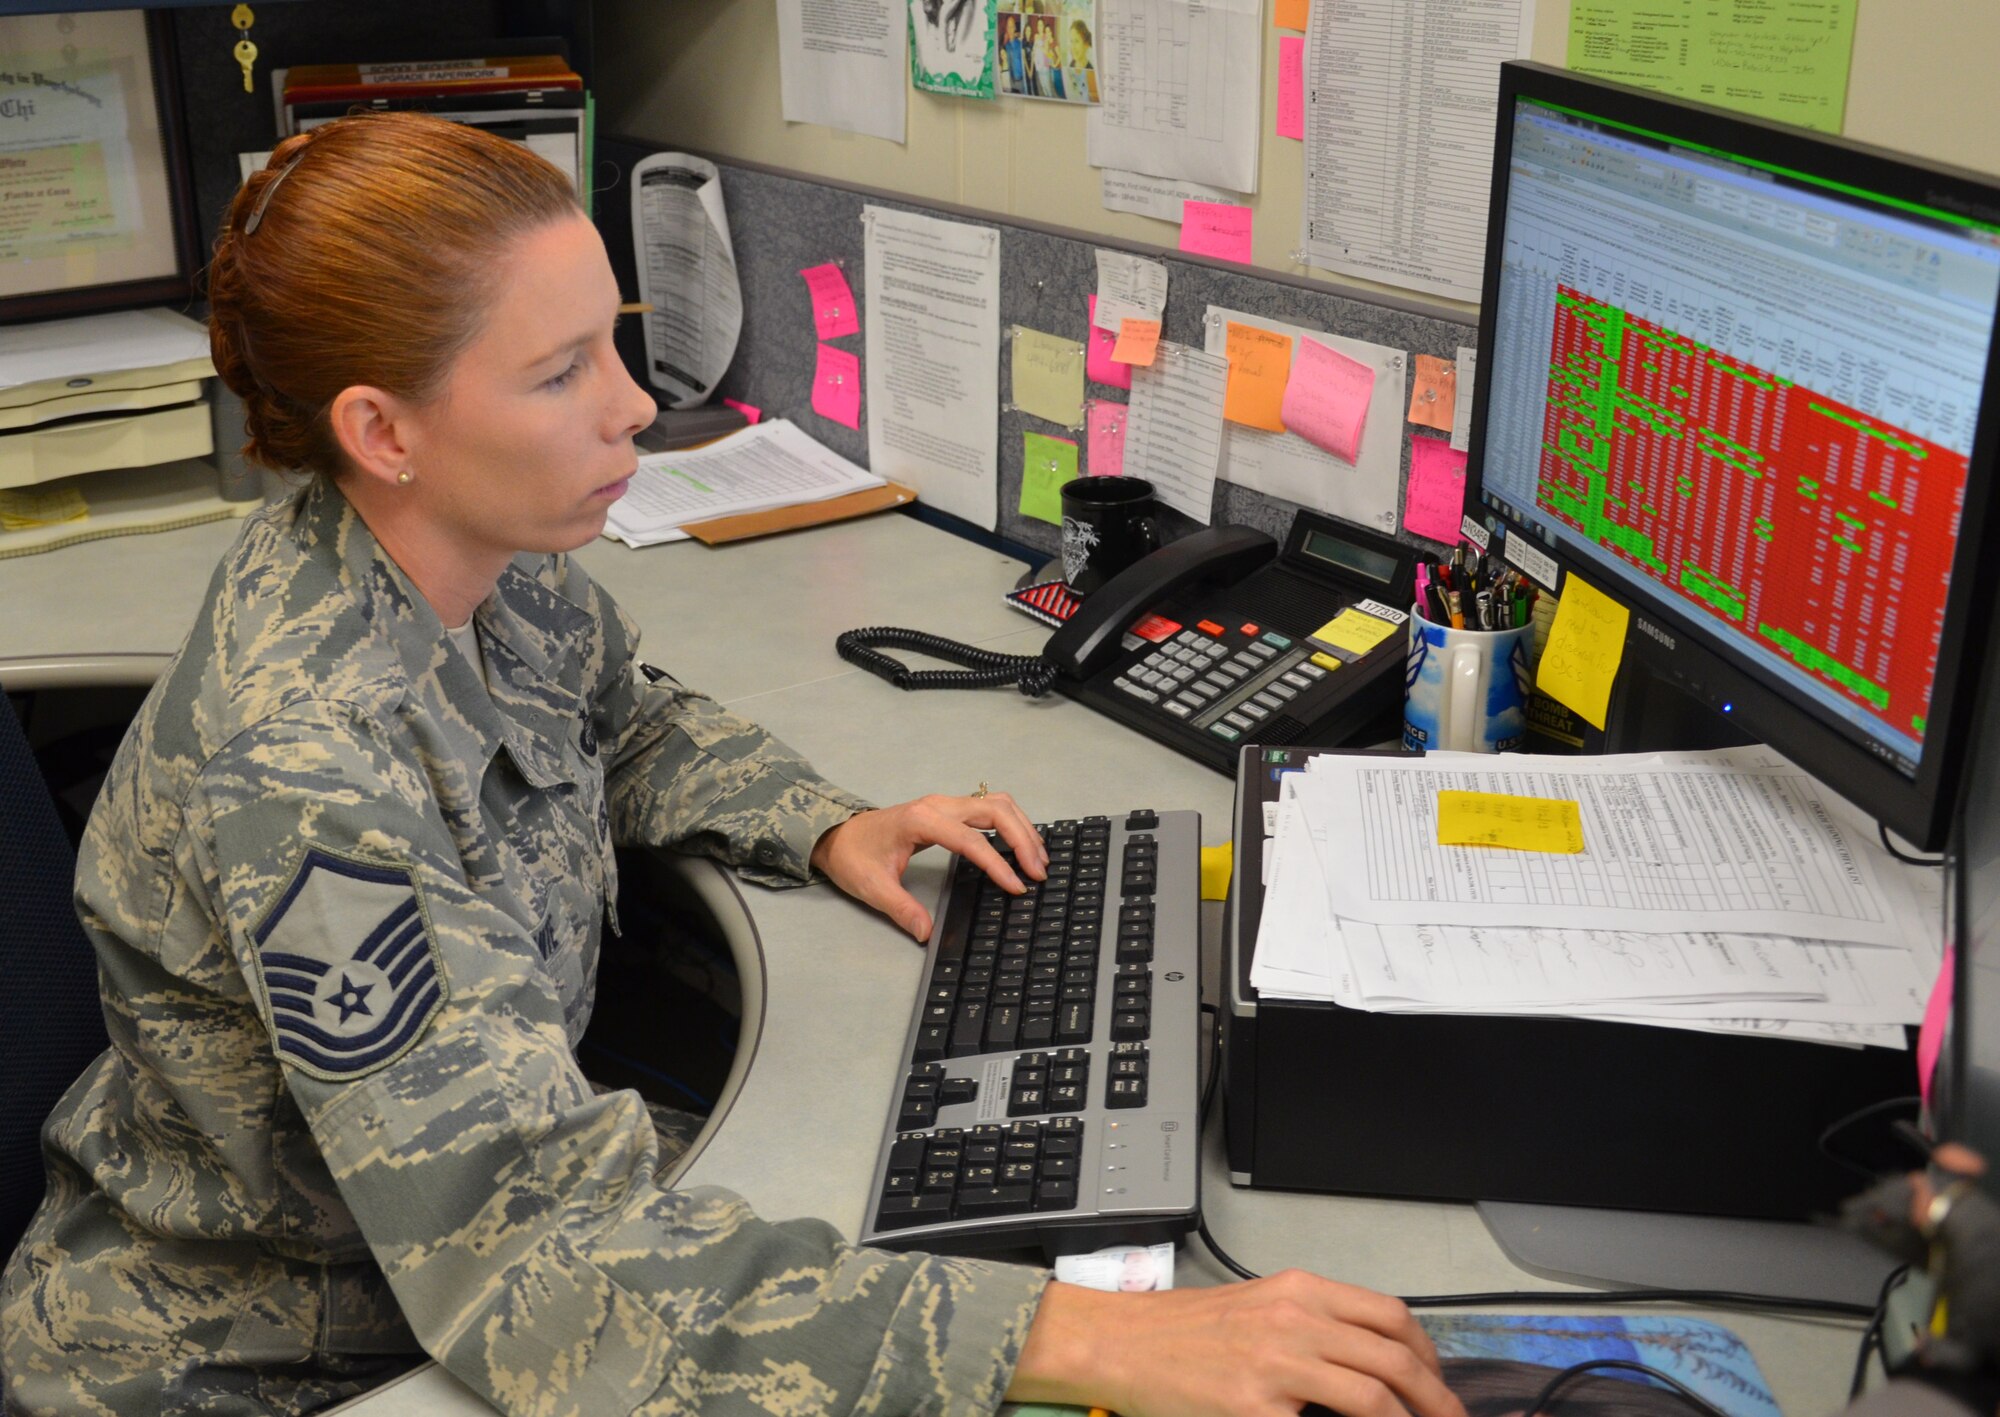 Master Sgt. Heidi White, the unit training manager for the 920th Maintenance Group, tracks pre-deployment training for group Airmen at Patrick Air Force Base, Fla., July 24, 2013, using a tracking tool she designed. Her tracking tool has led to streamlined processes and increased efficiencies for deploying Airmen and their supervisors throughout the wing. (U.S. Air Force photo/Tech. Sgt. Anna-Marie Wyant)